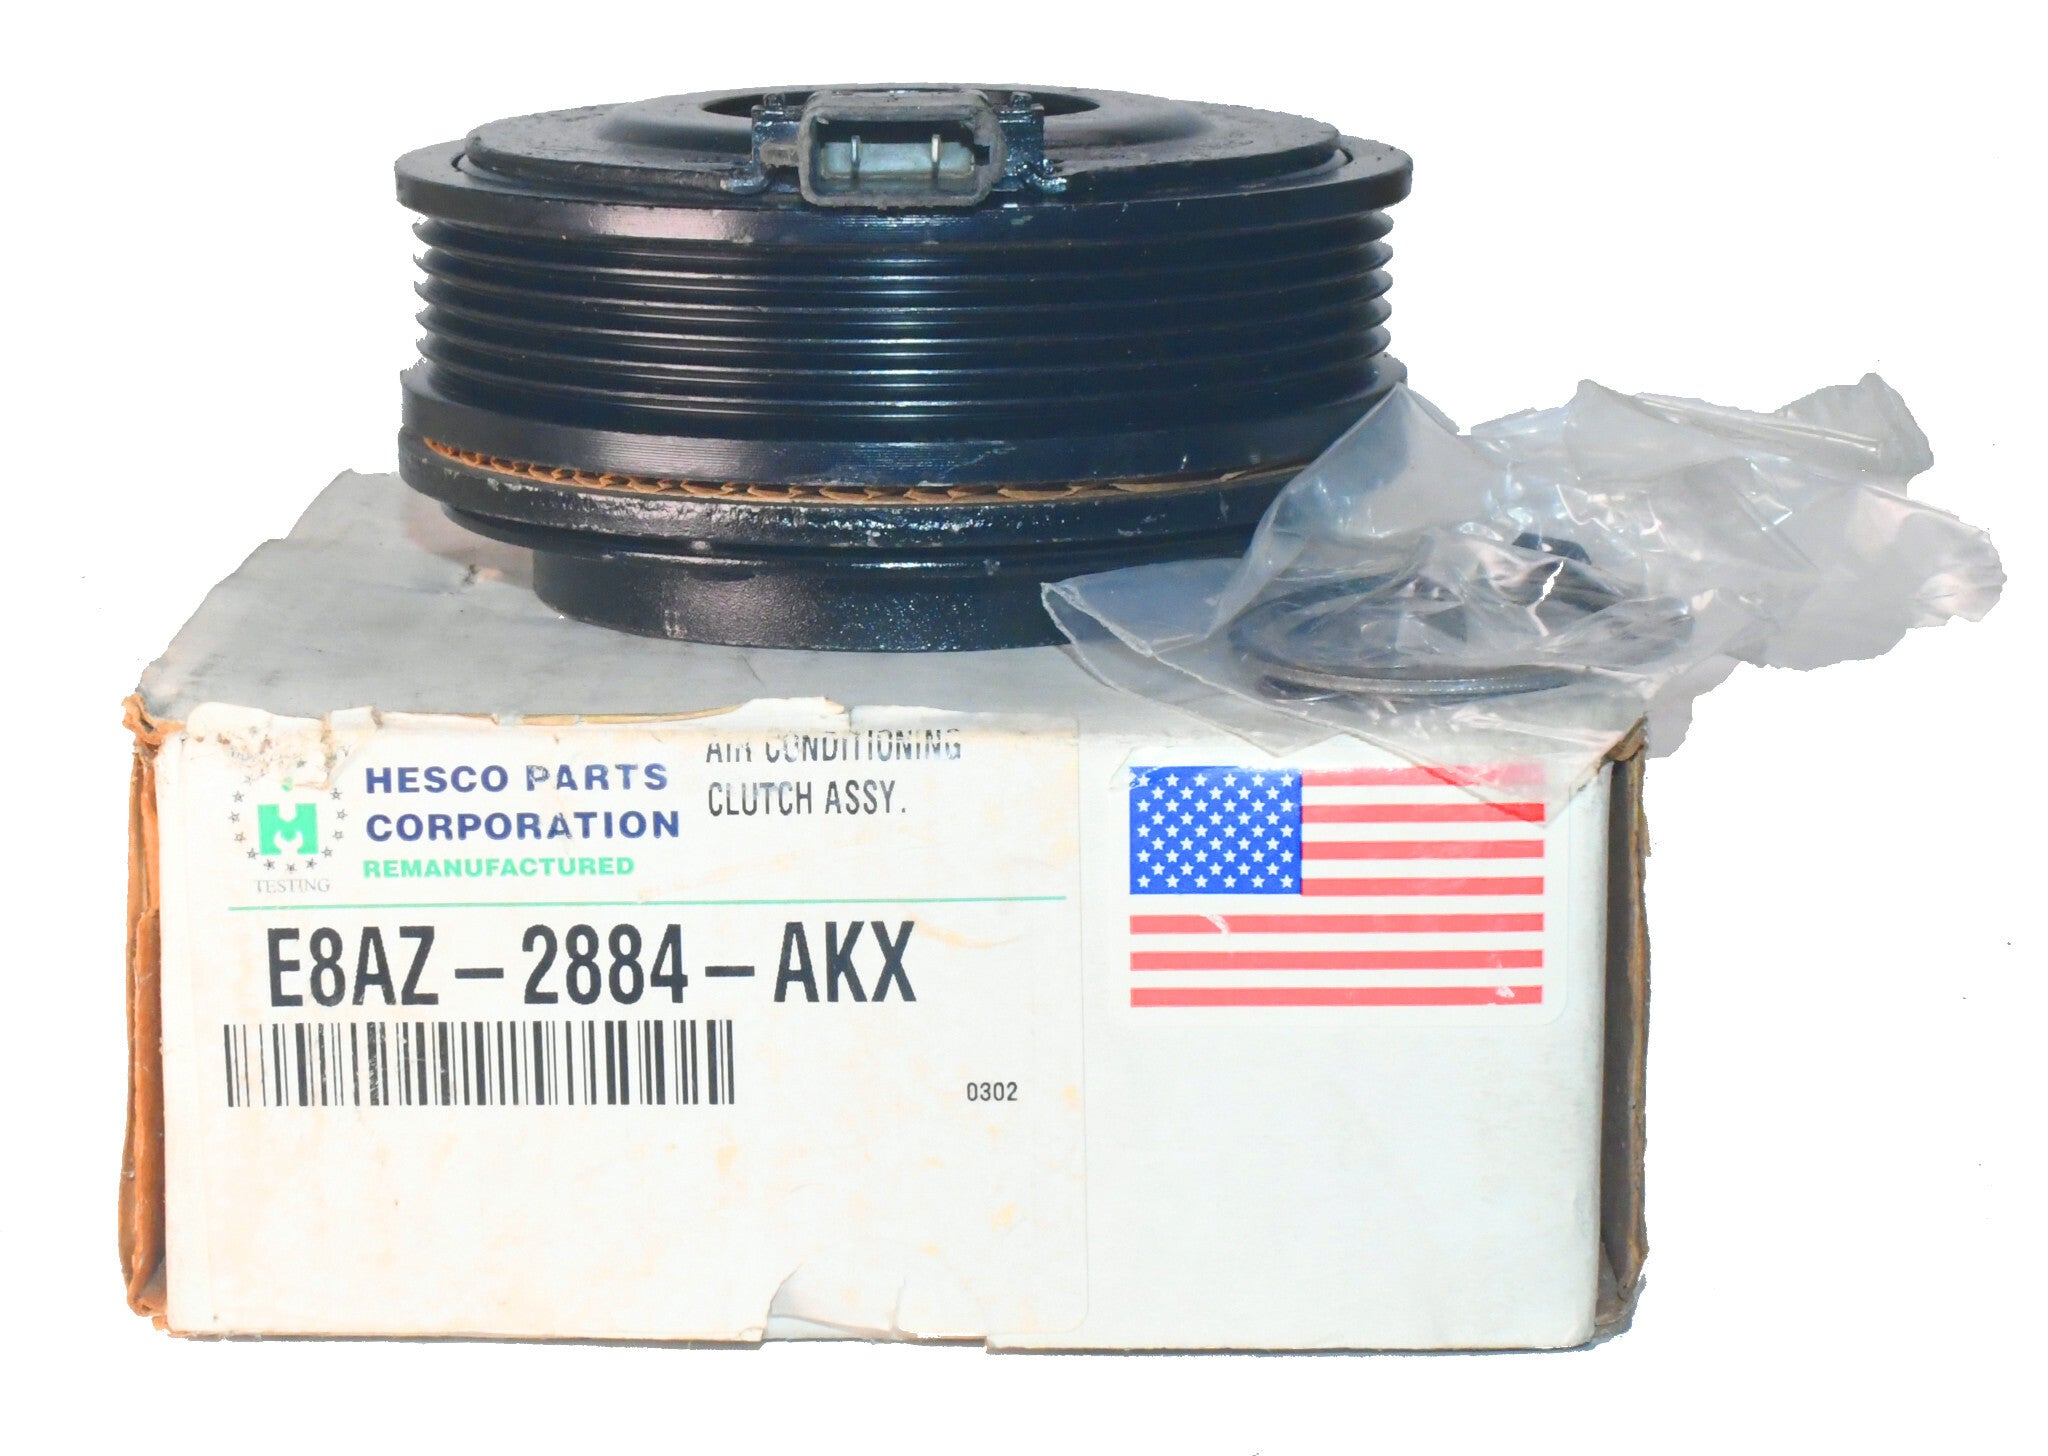 Remanufactured A/C compressor clutch assembly for 1988 Ford A body full size cars from Hesco E8AZ-2884-AKX